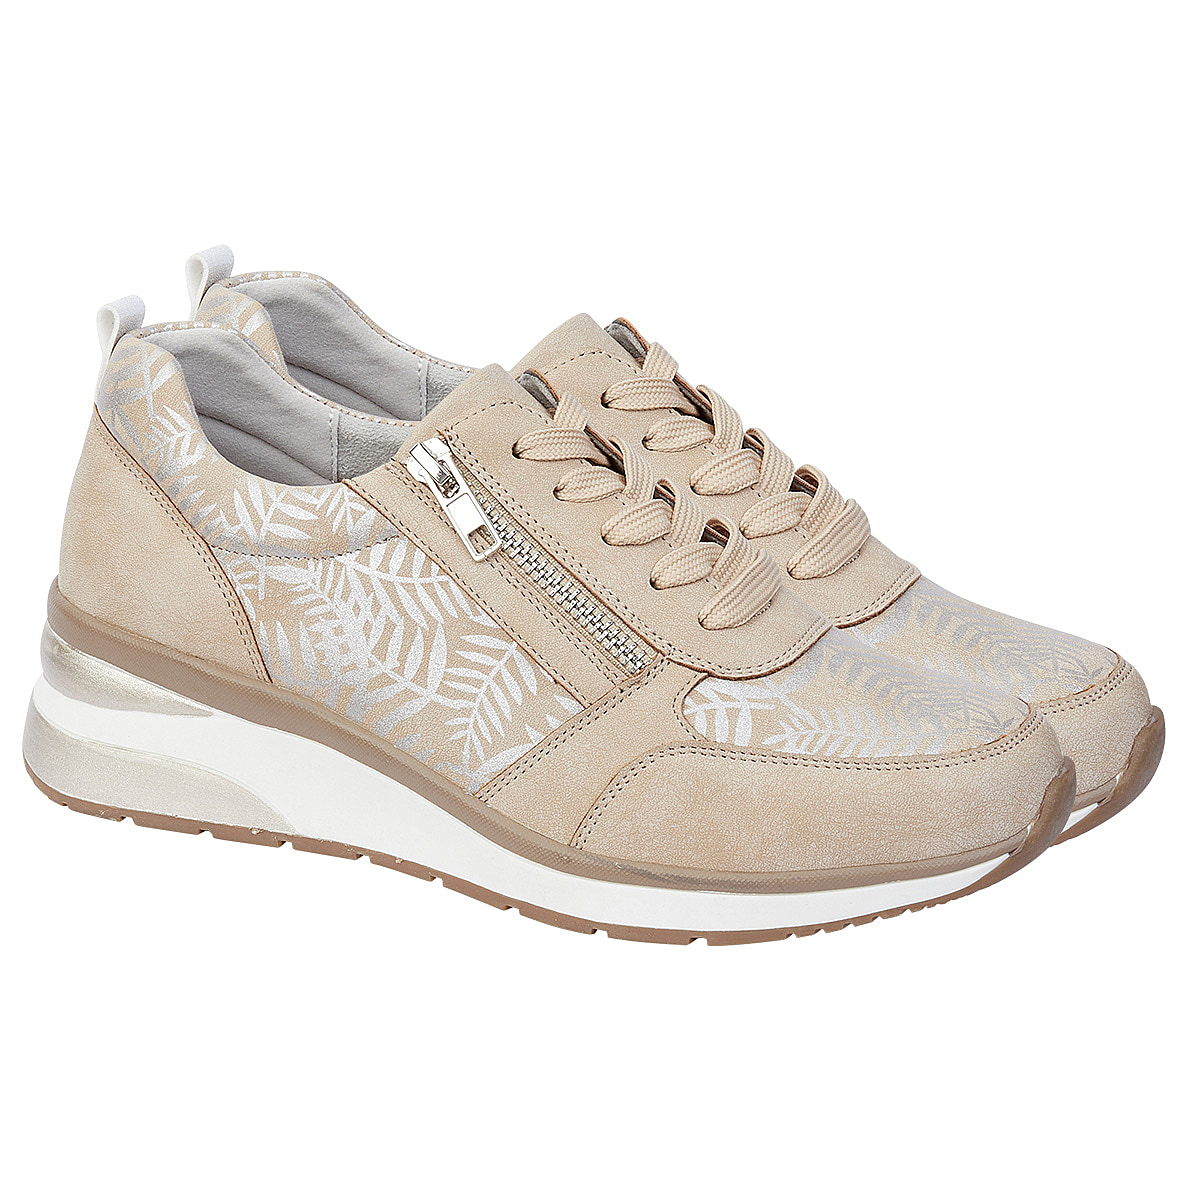 Lace Up Zip Fastening TROPICAL Ladies Shoes (Size 5) - Beige